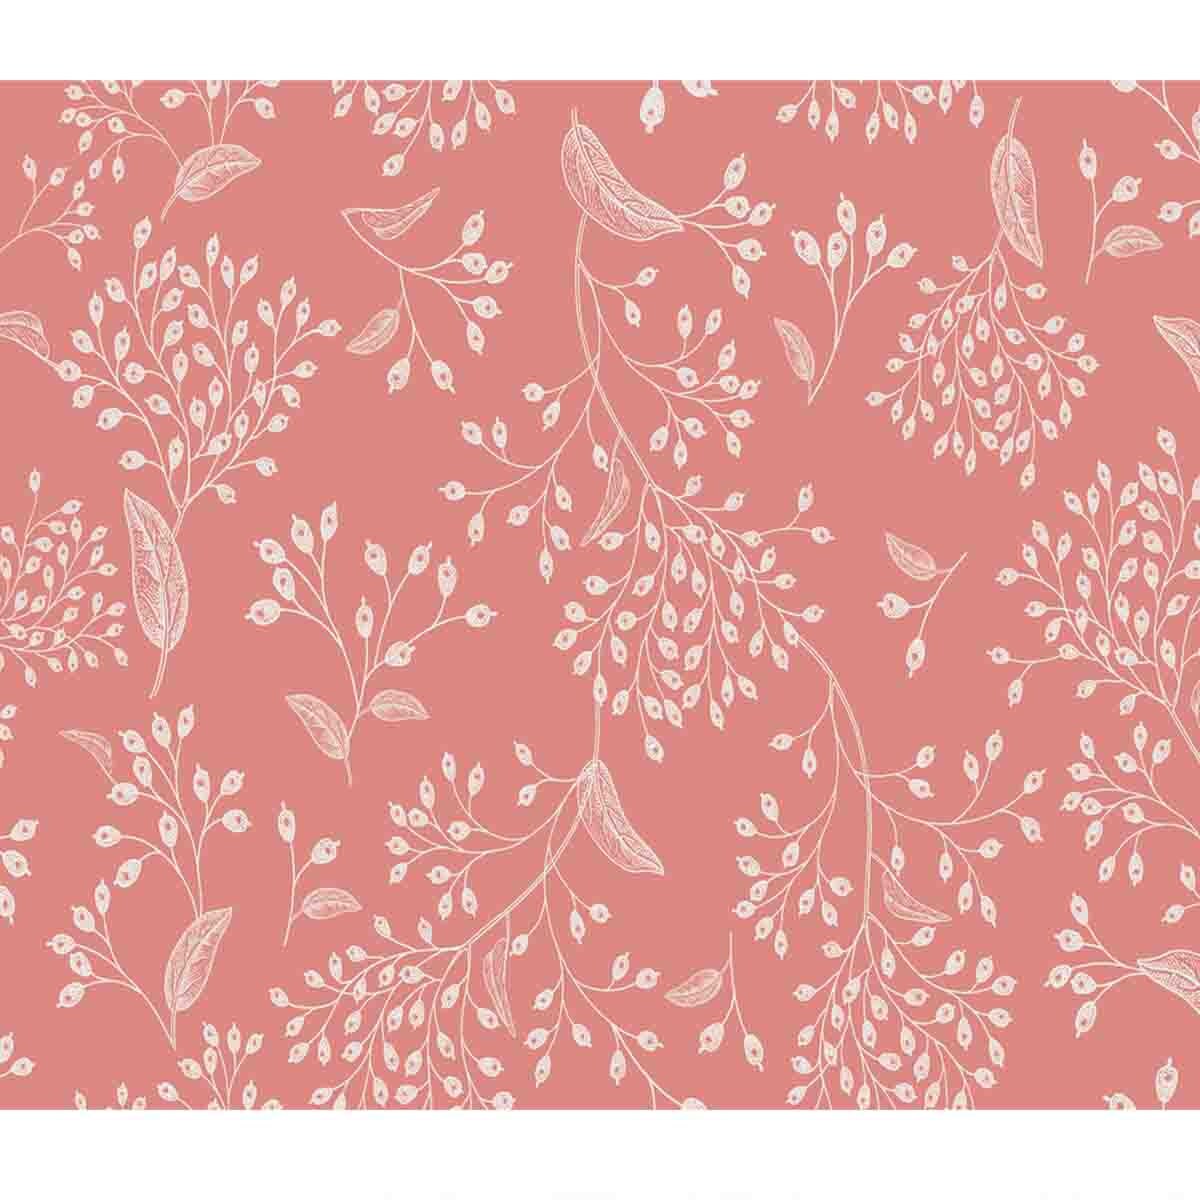 Oriental Style Pink and White Floral Vintage Wallpaper Bedroom Mural